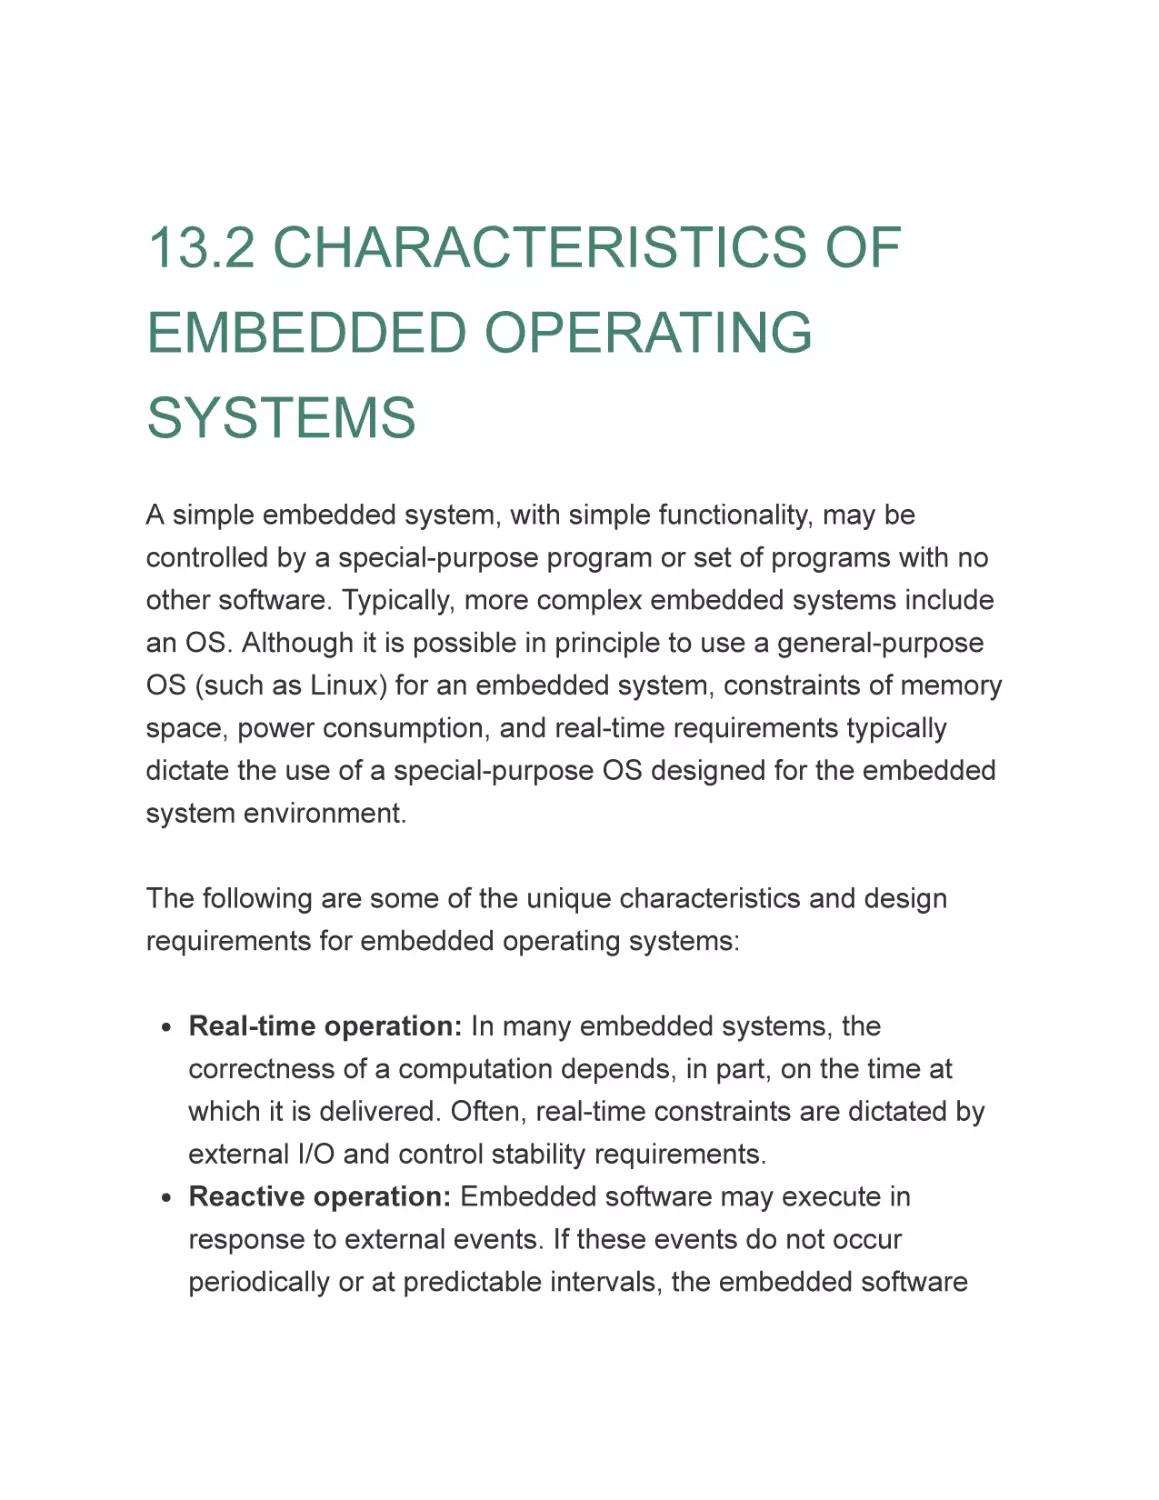 13.2 CHARACTERISTICS OF EMBEDDED OPERATING SYSTEMS